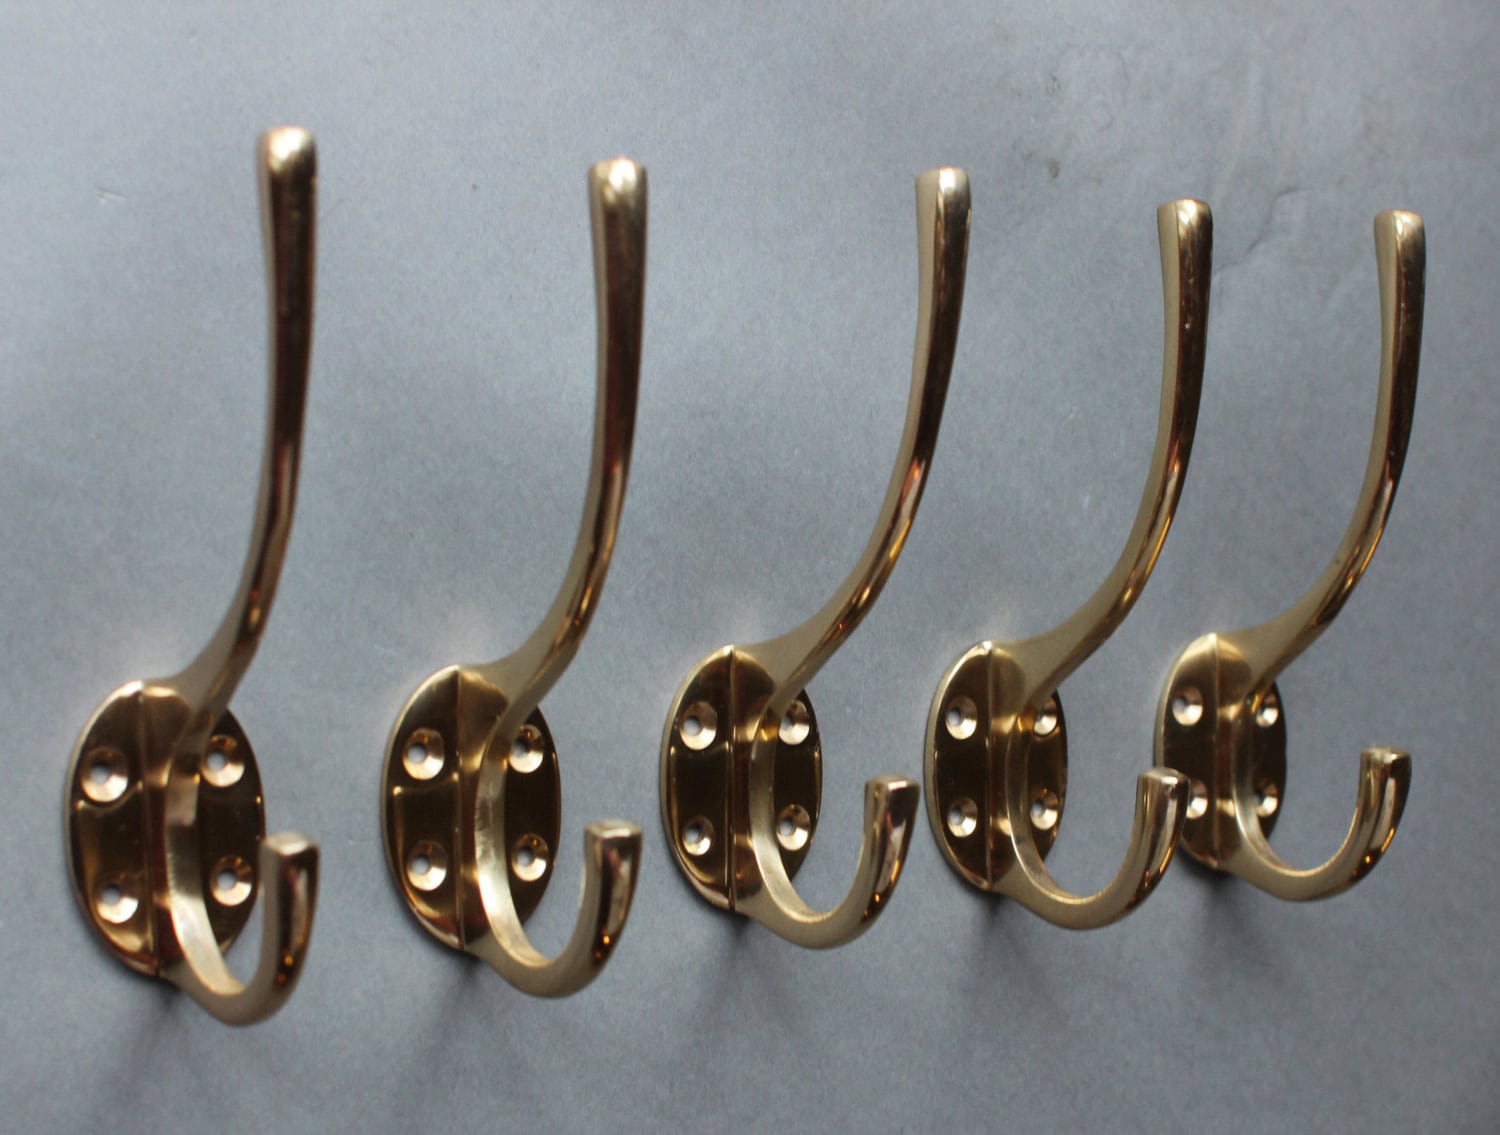 6 Piece Coat Hook Vintage Hooks Metal Coat Rack Clothes Wall Hooks With  Screws Bronz(free Shipping)